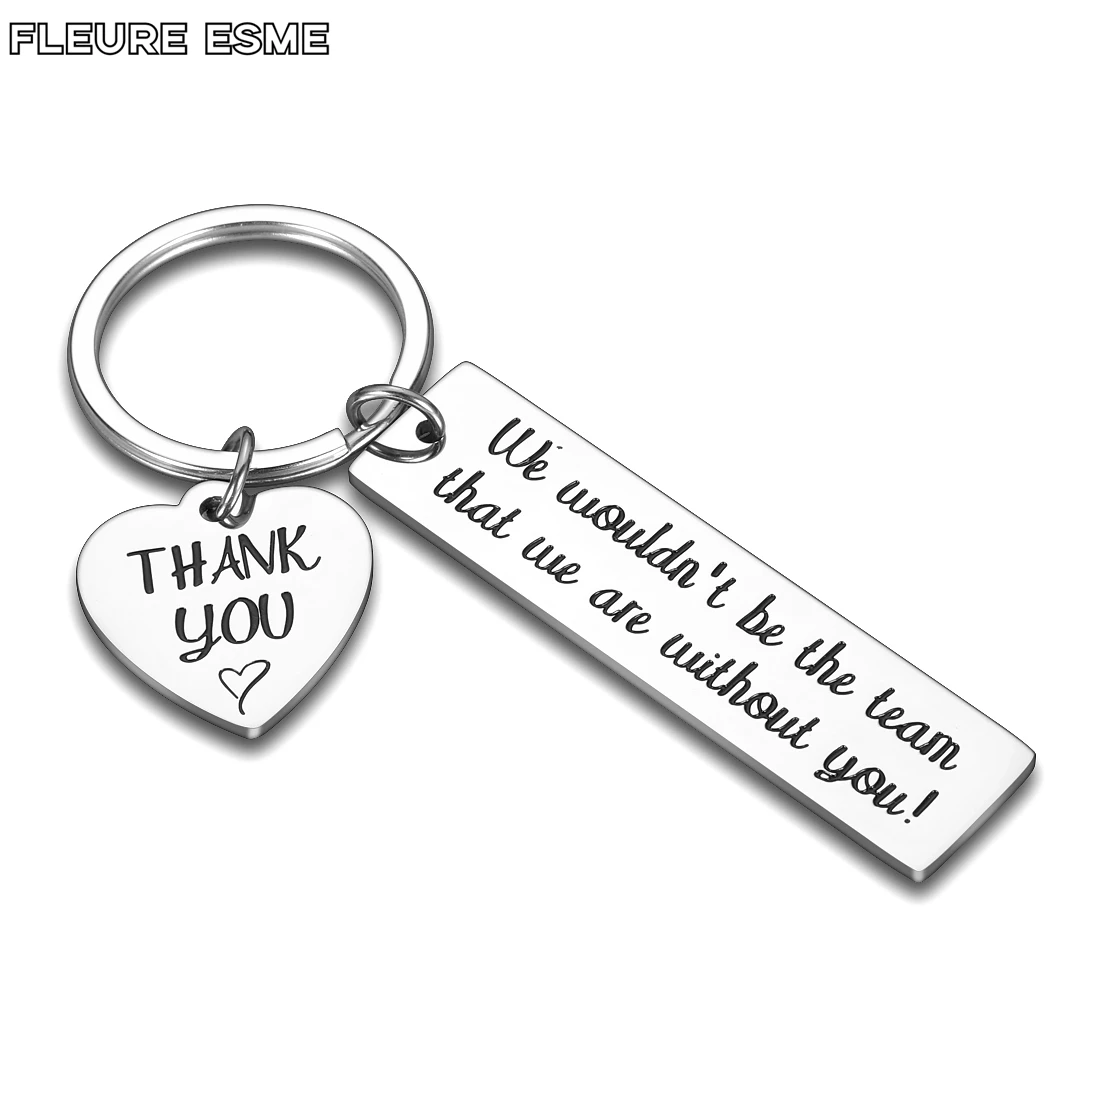 

Employee Appreciation Keychain Gift for Coworker Work Team Player Instructor Thank You Key Charm for Leader Social Worker Boss